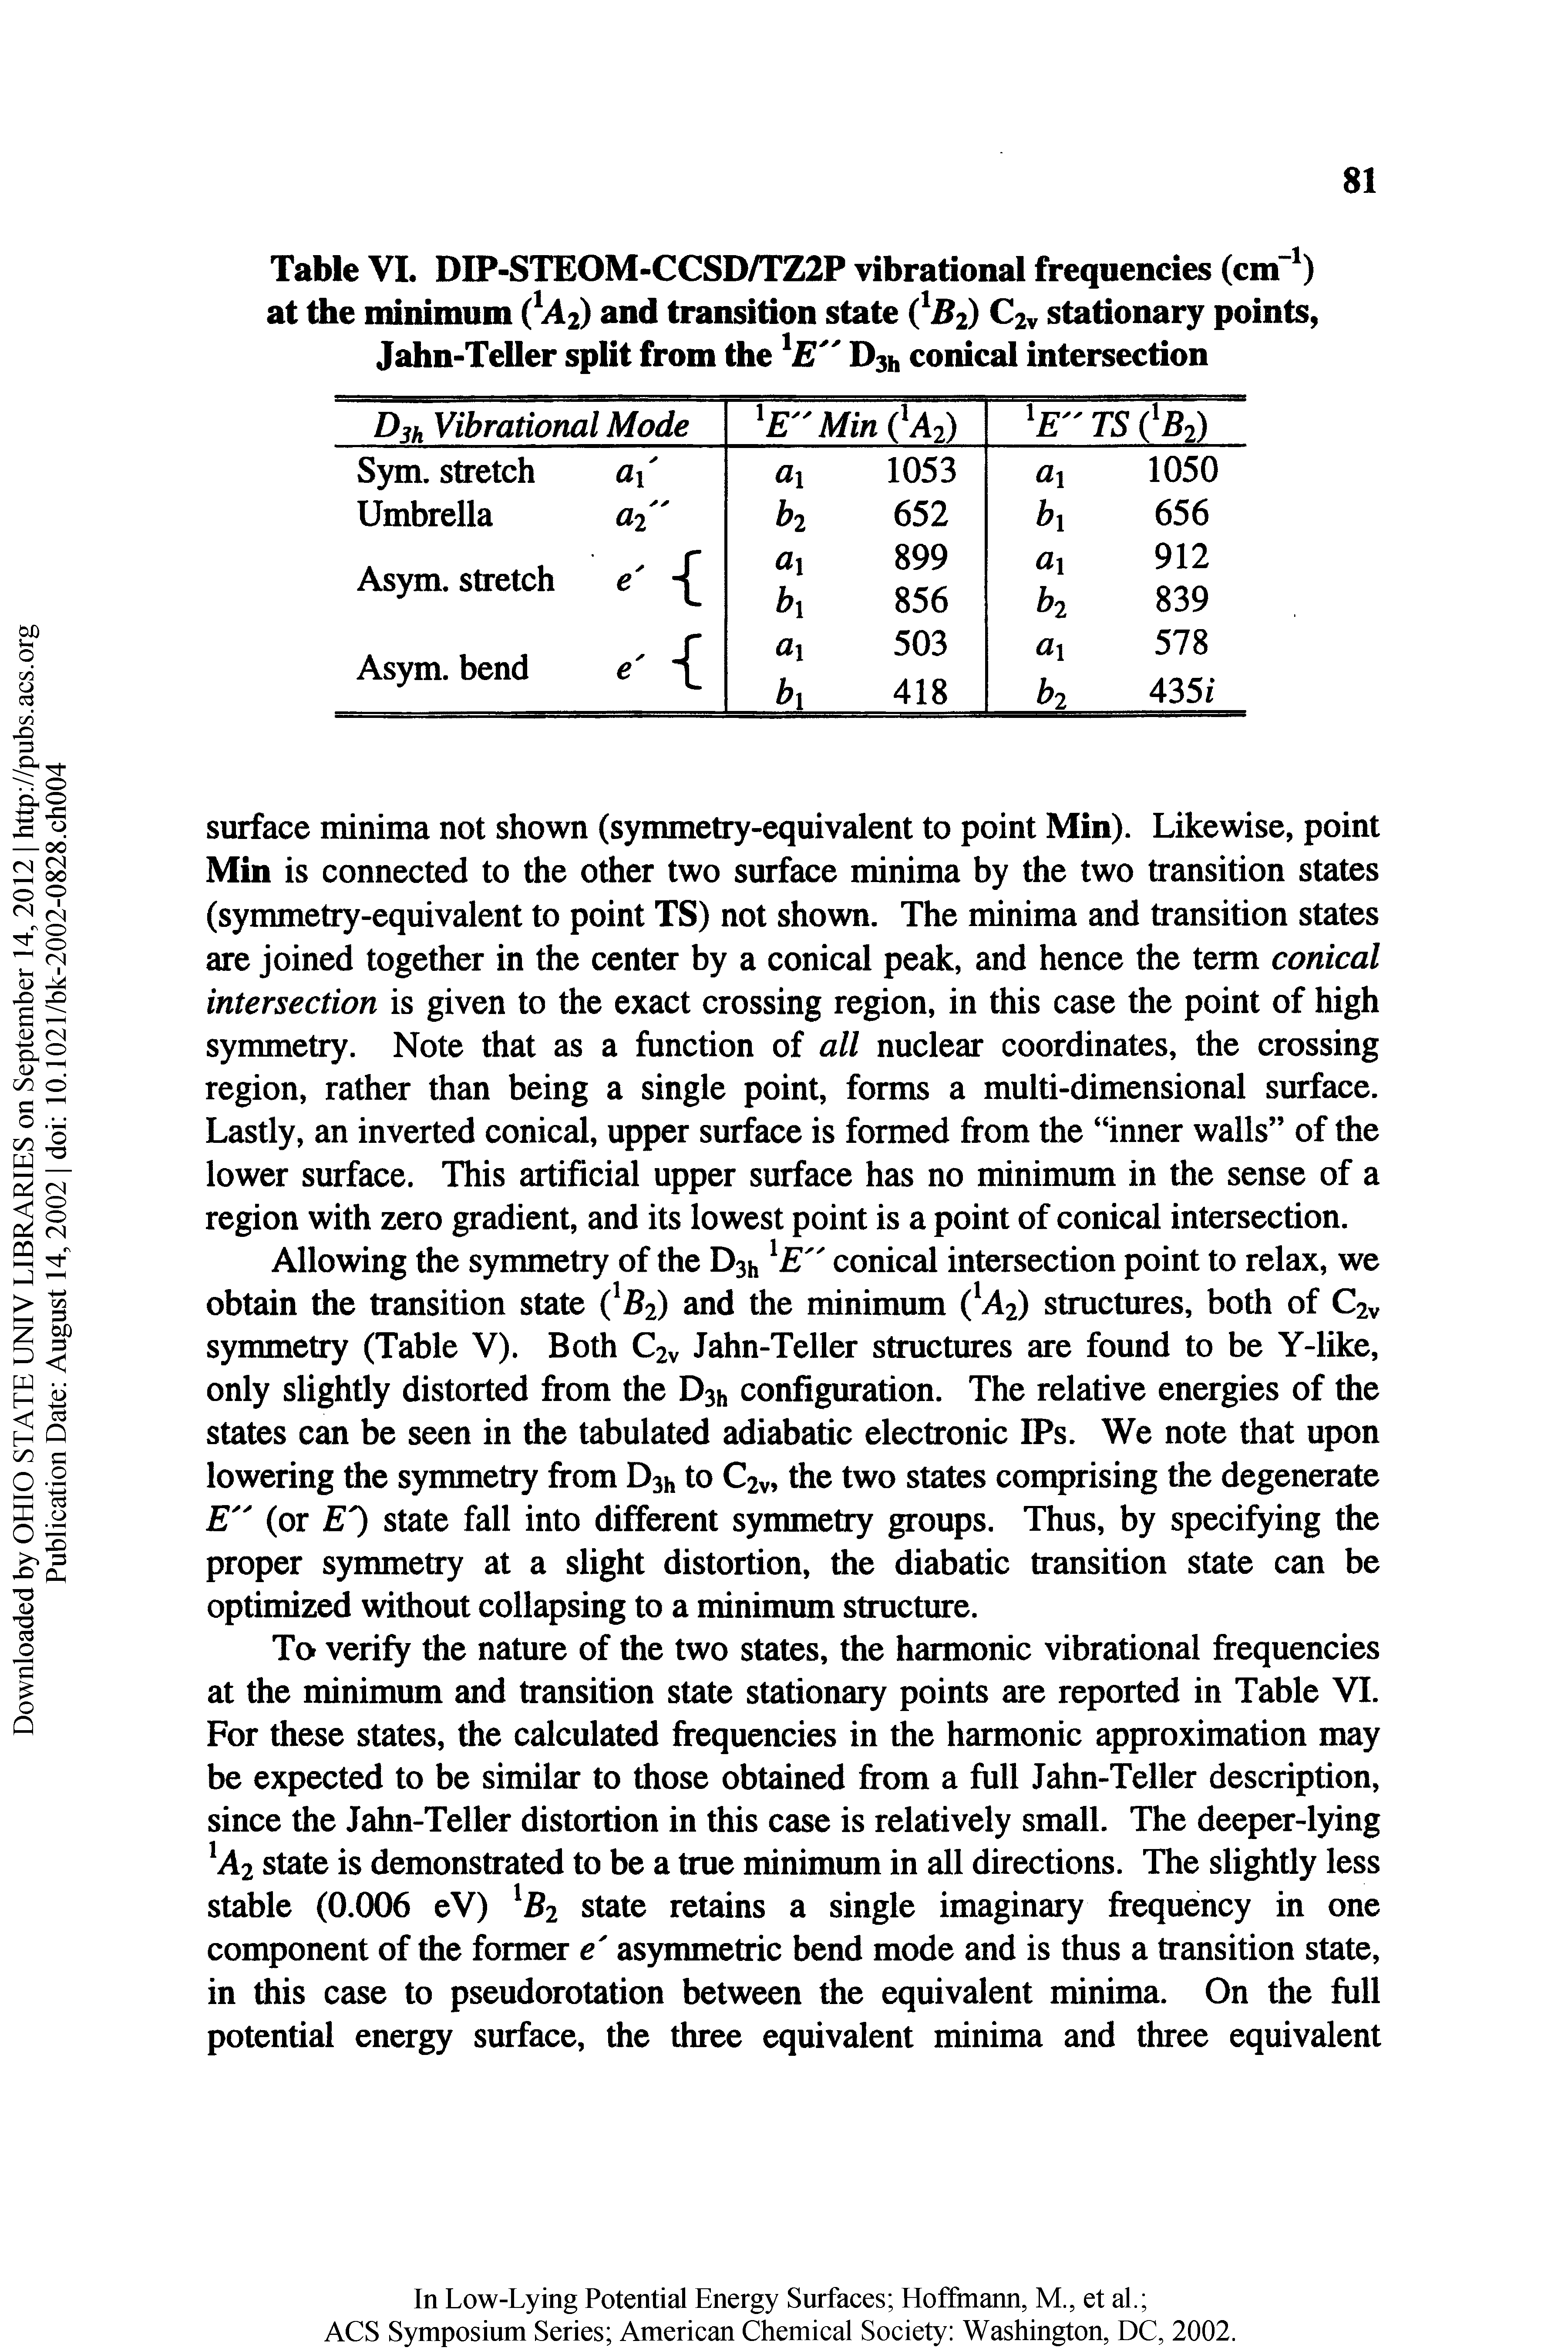 Table VI. DIP-STEOM-CCSD/TZ2P vibrational frequencies (cm" ) at the minimum ( 2) and transition state ( 2) stationary points, Jahn-Teller split from the D311 conical intersection...